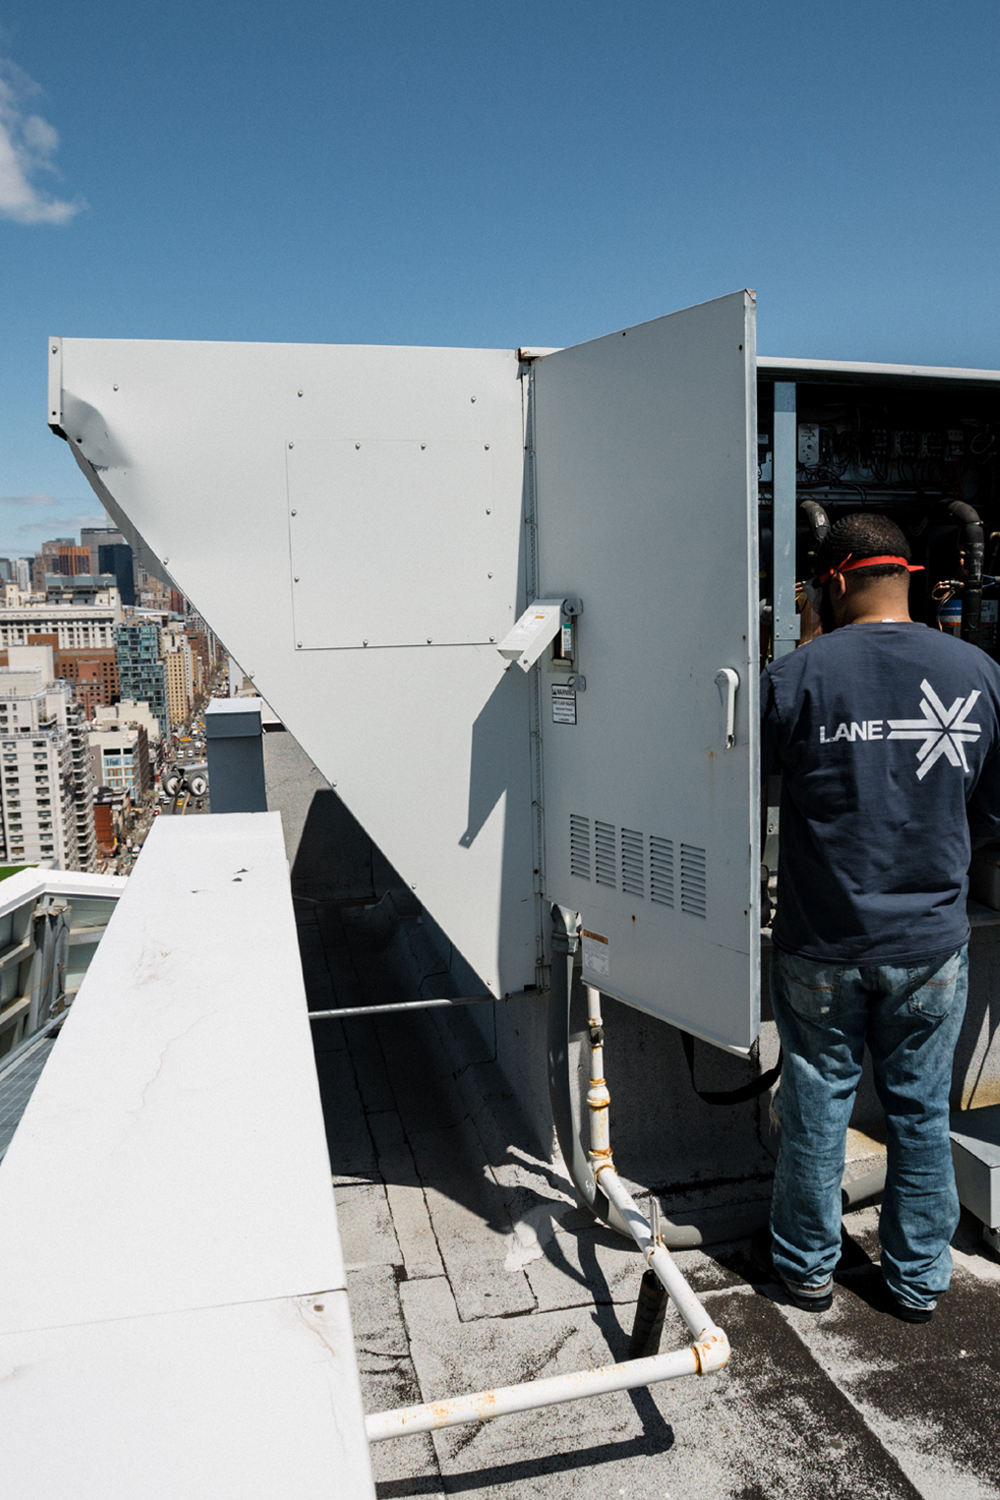 Servicing a Rooftop Heating Unit